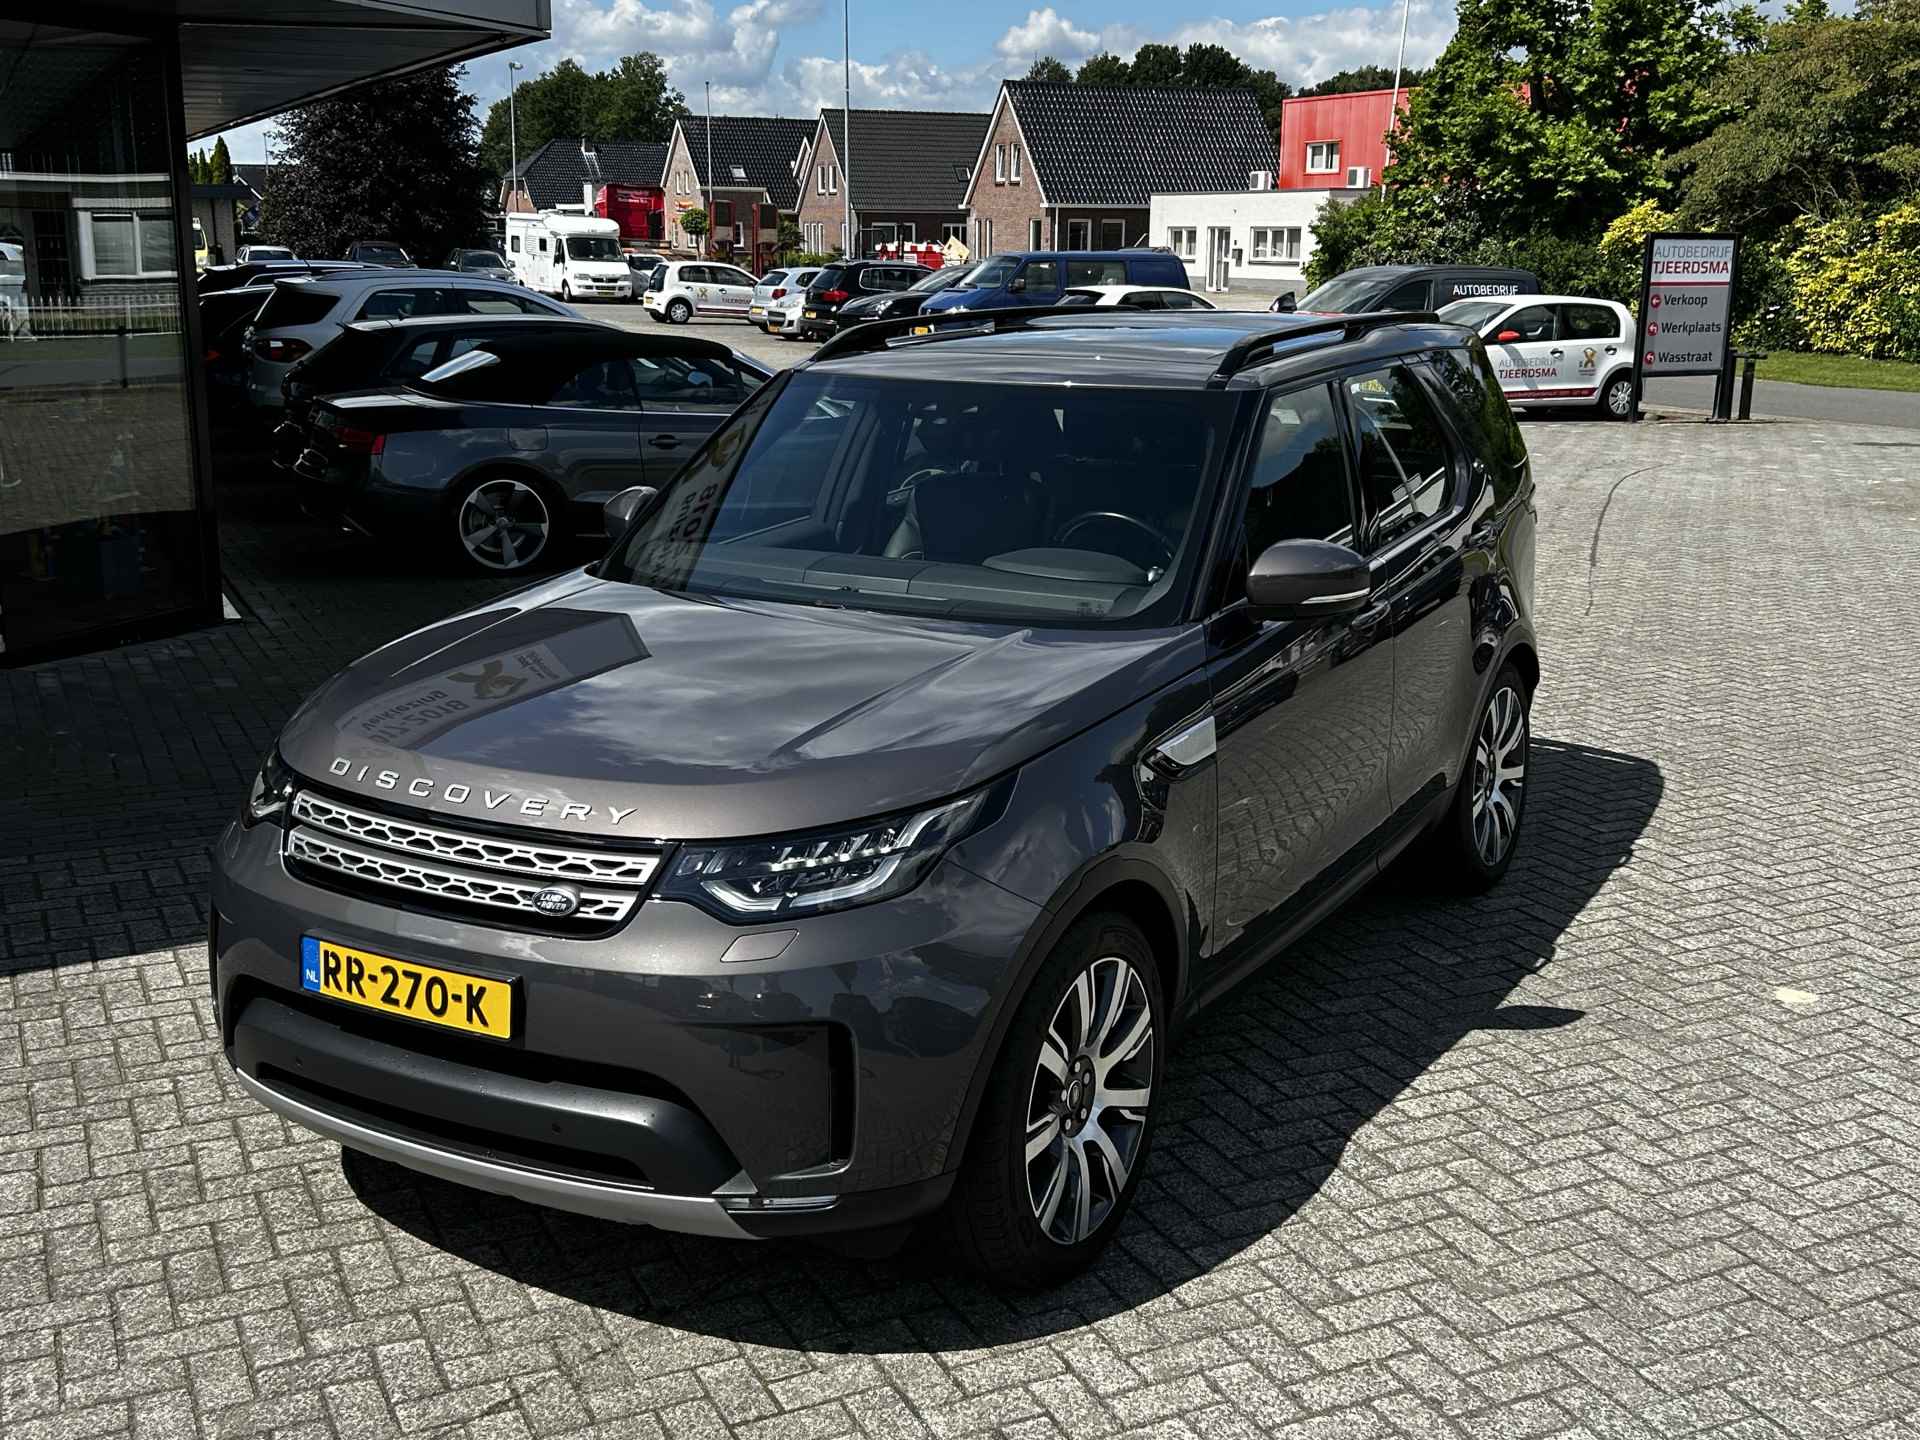 Land Rover Discovery 2.0 Sd4 HSE Luxury 7p. Navi/Clima/Leder/Panodak/7-Persoons/Luchtvering/Trekhaak - 4/48